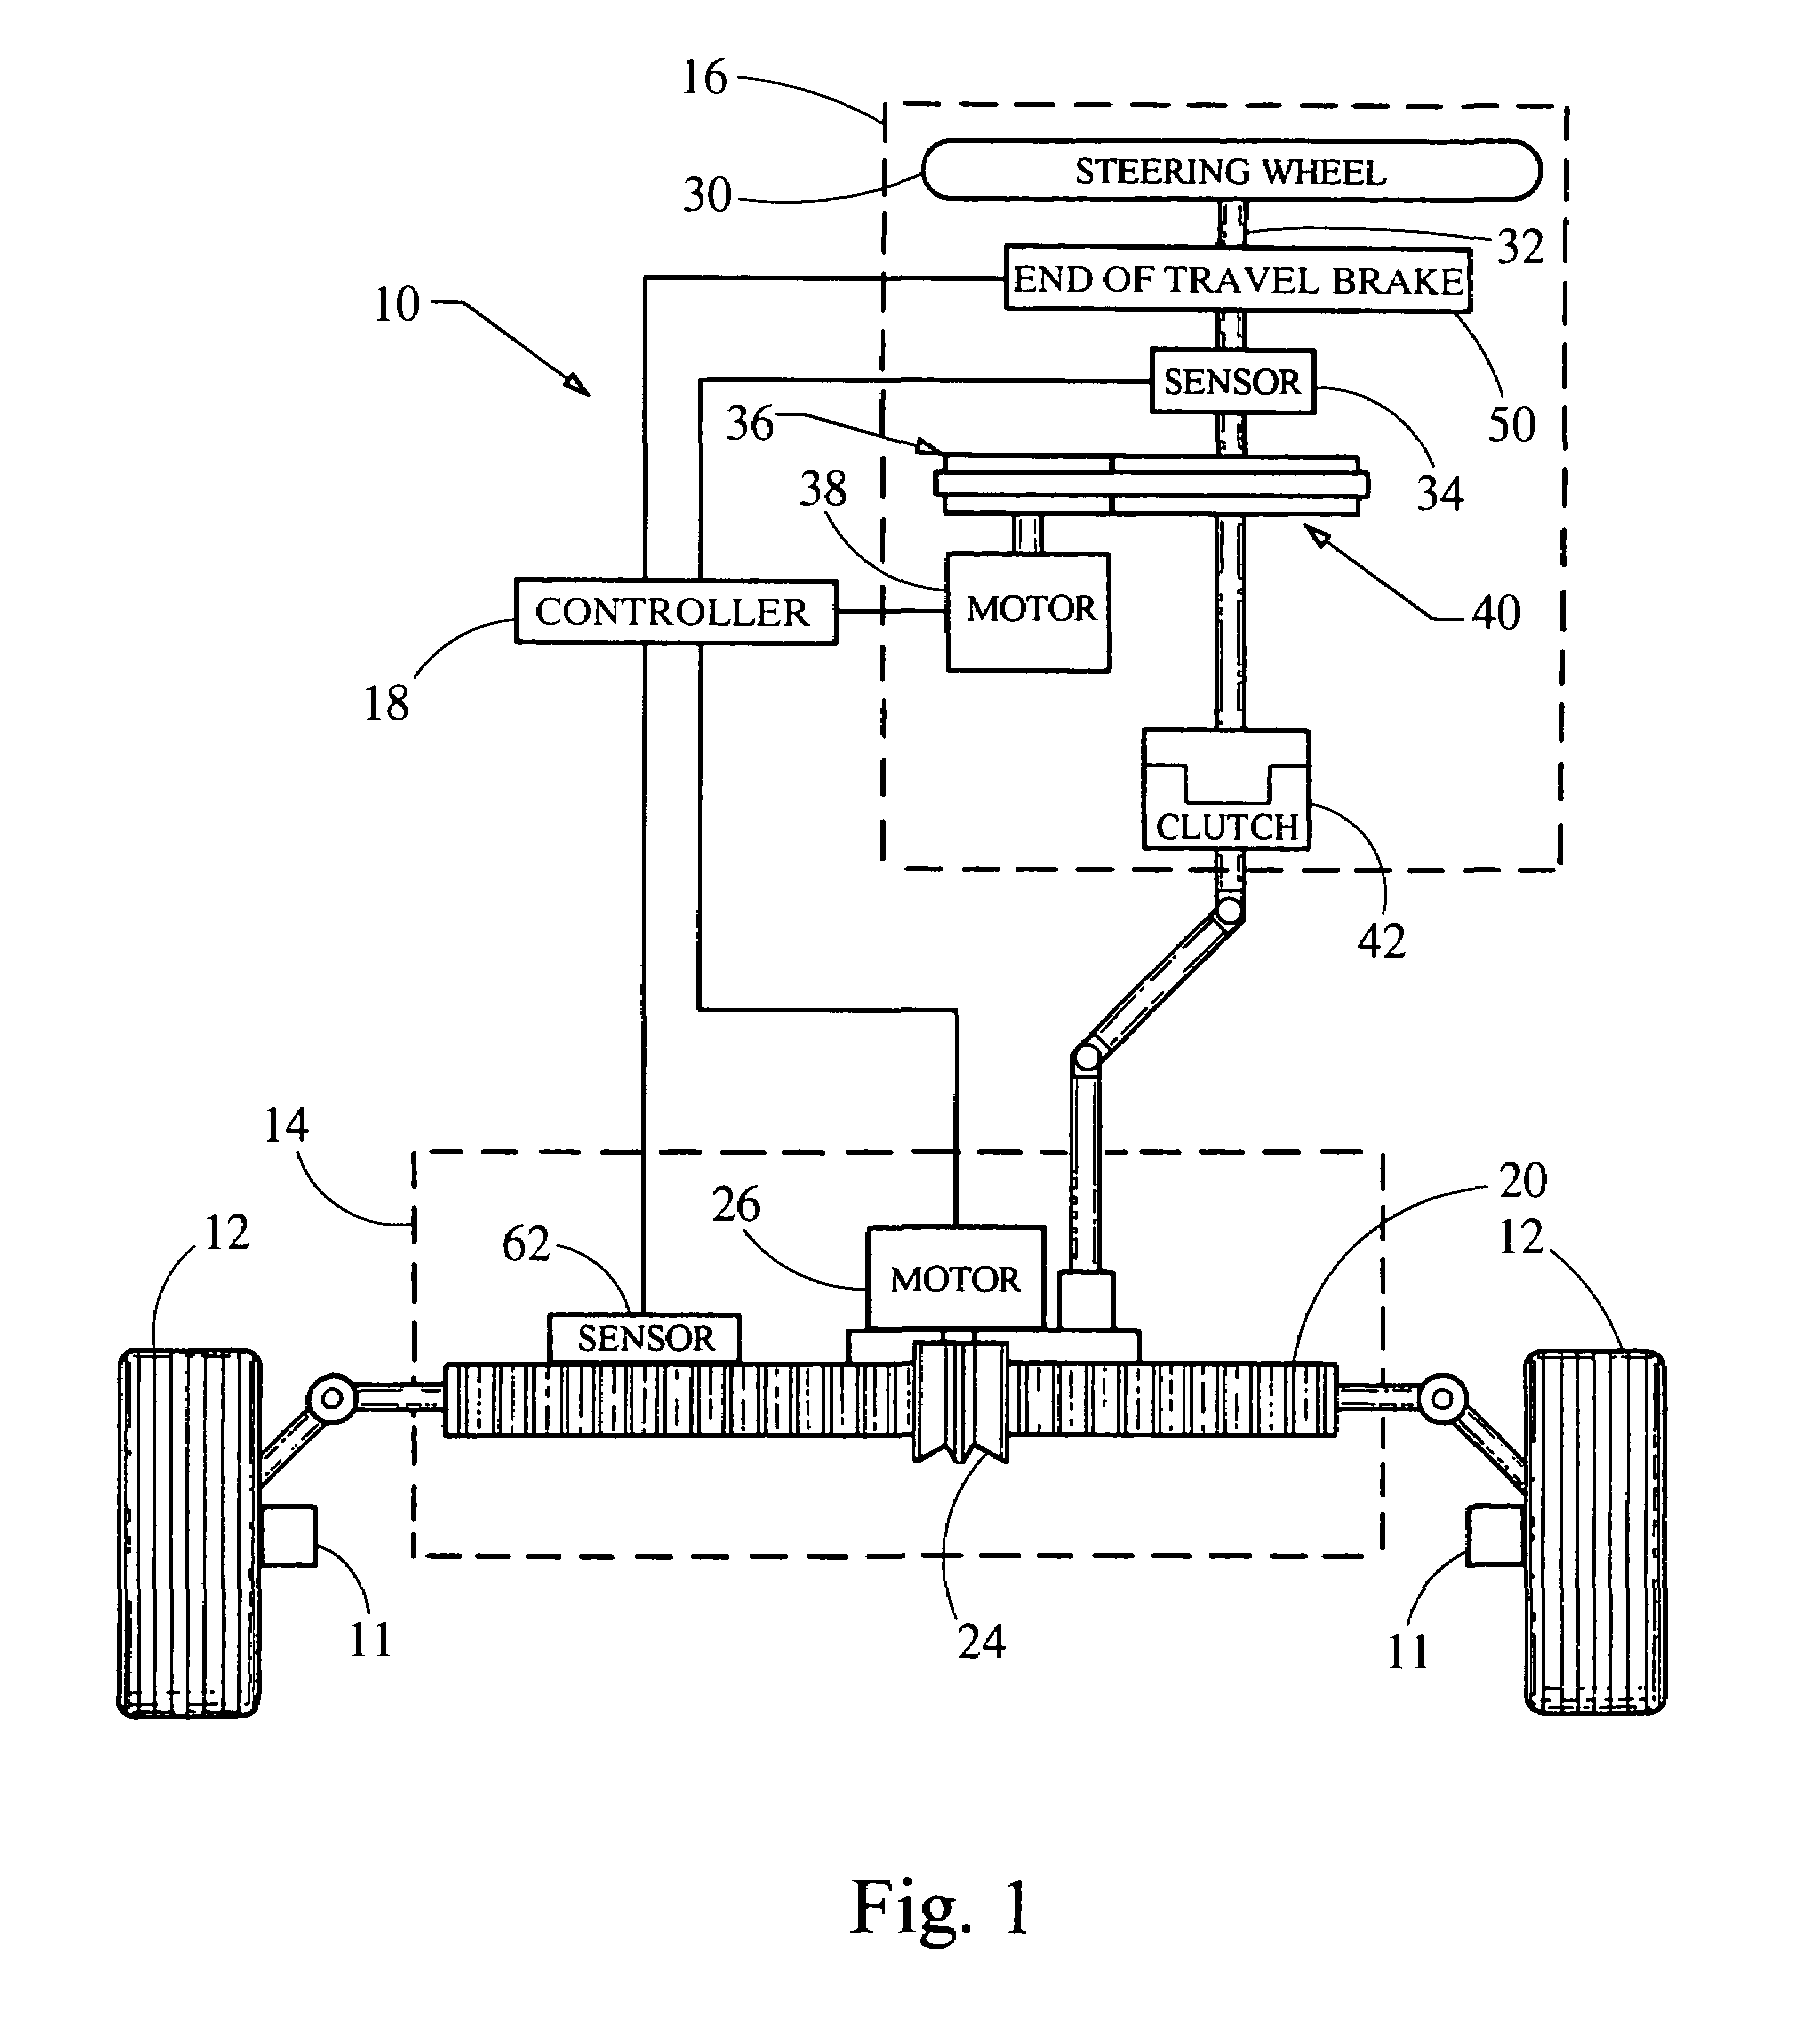 Driver interface system for steer-by-wire system